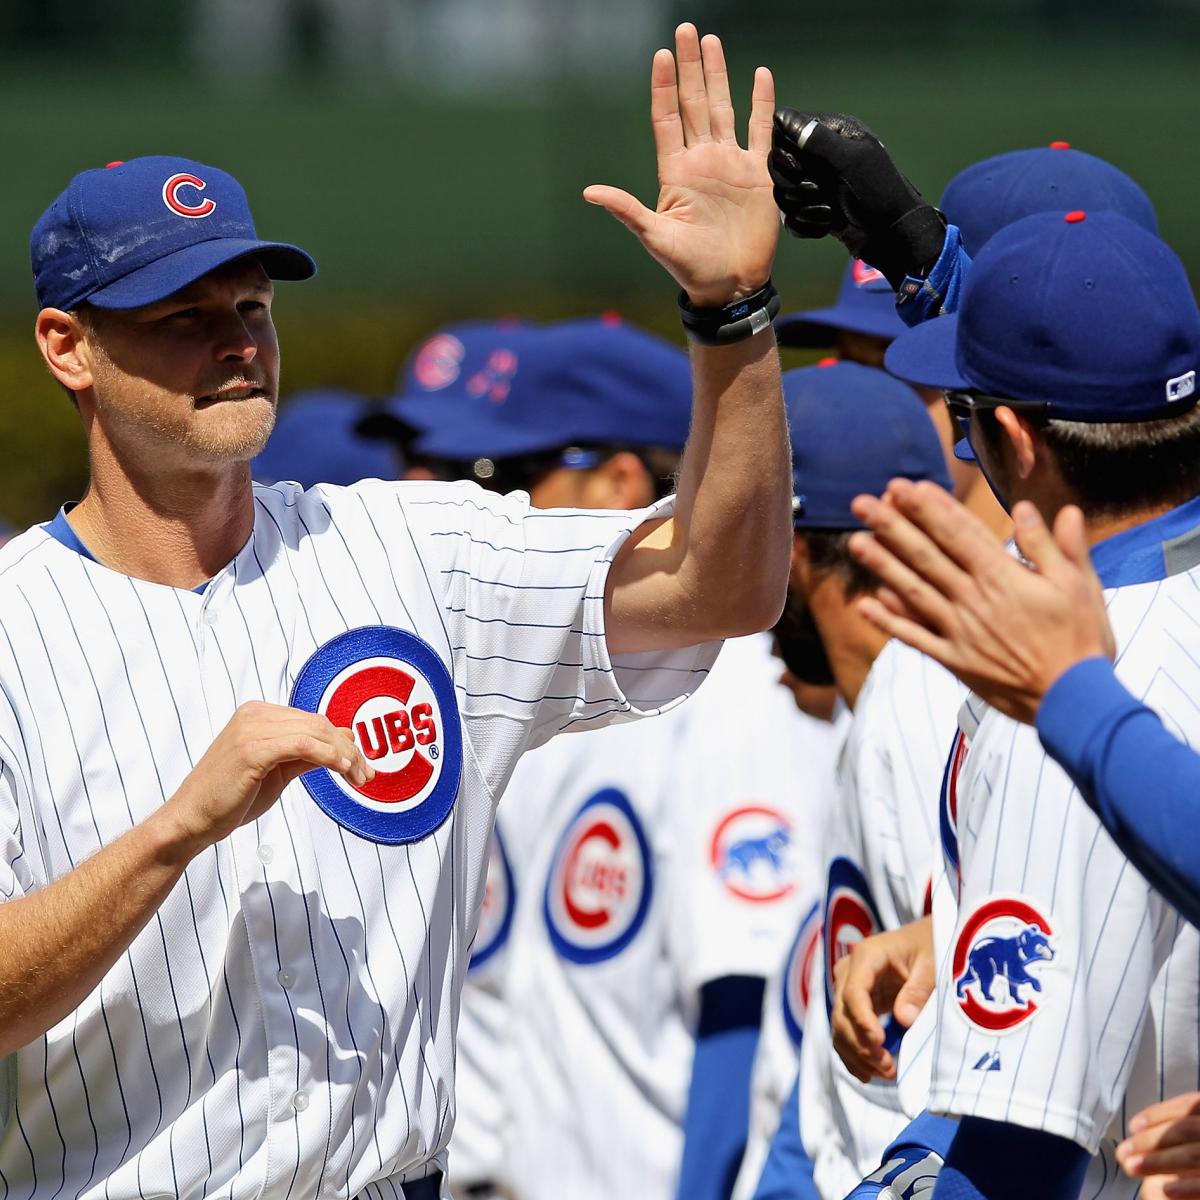 Kerry Wood Calls It Quits: A Sad End to a Once-Promising Career